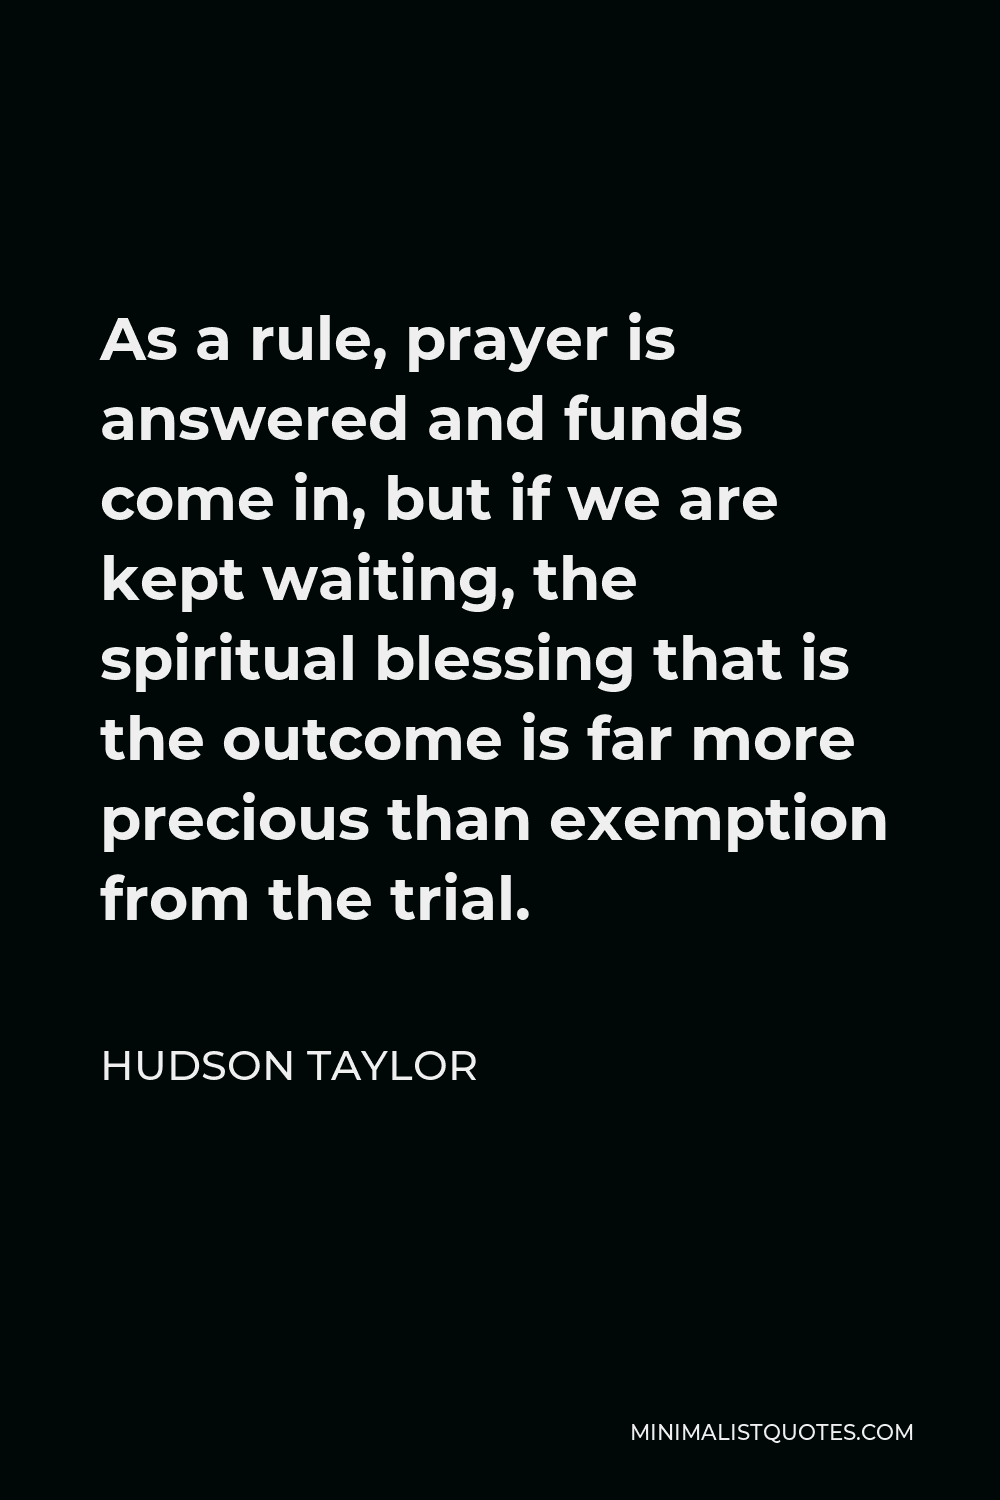 Hudson Taylor Quote - As a rule, prayer is answered and funds come in, but if we are kept waiting, the spiritual blessing that is the outcome is far more precious than exemption from the trial.